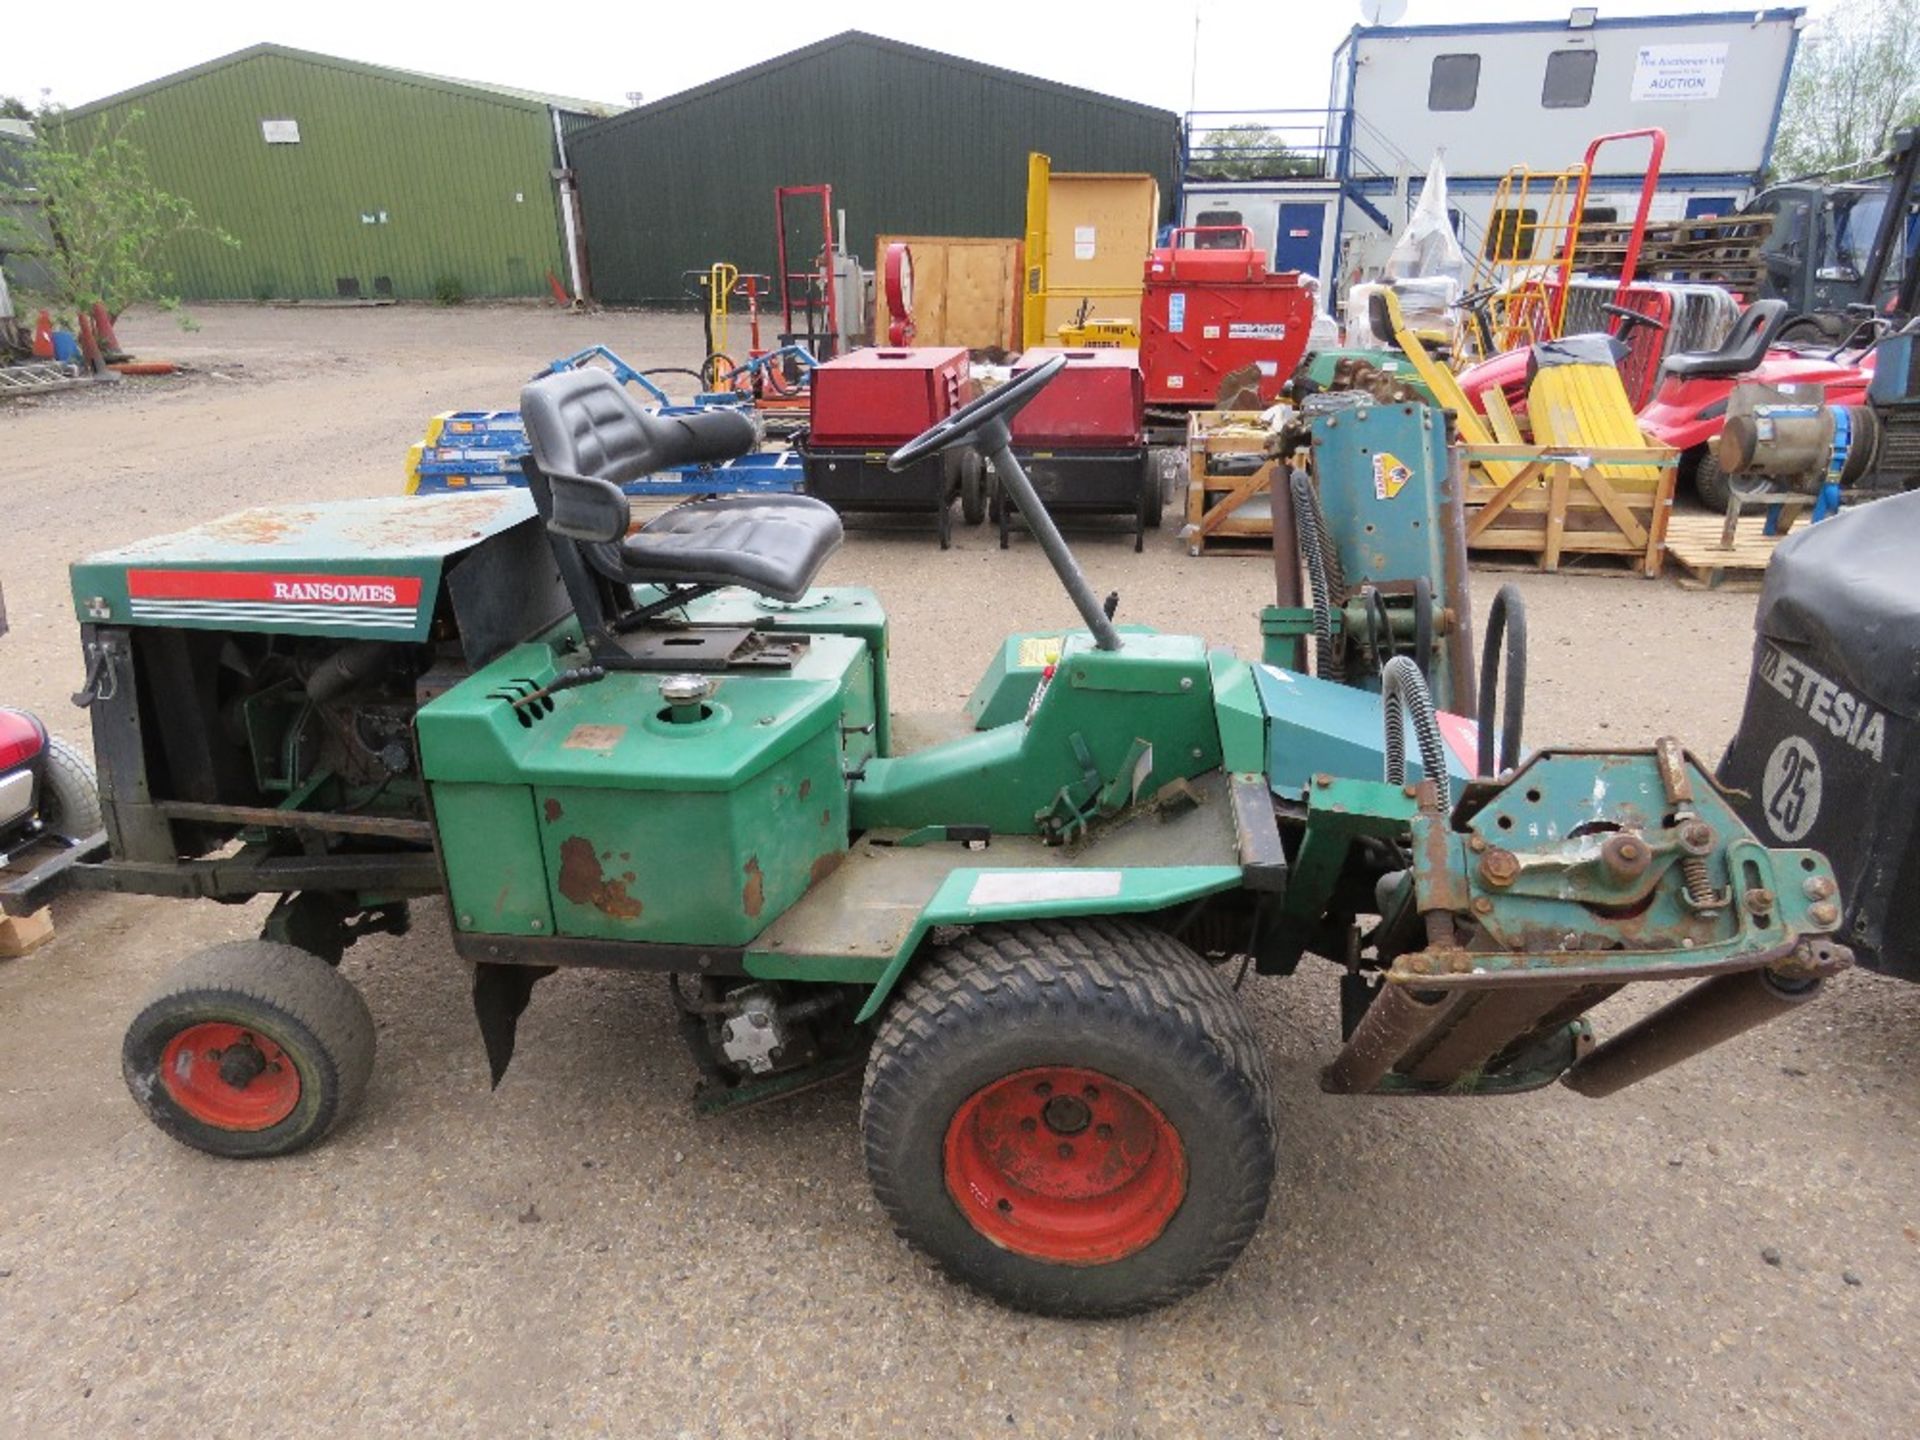 RANSOMES 213 TRIPLE MOWER WITH KUBOTA DIESEL ENGINE. WHEN TESTED WAS SEEN TO DRIVE, MOWERS TURNED AN - Image 4 of 8